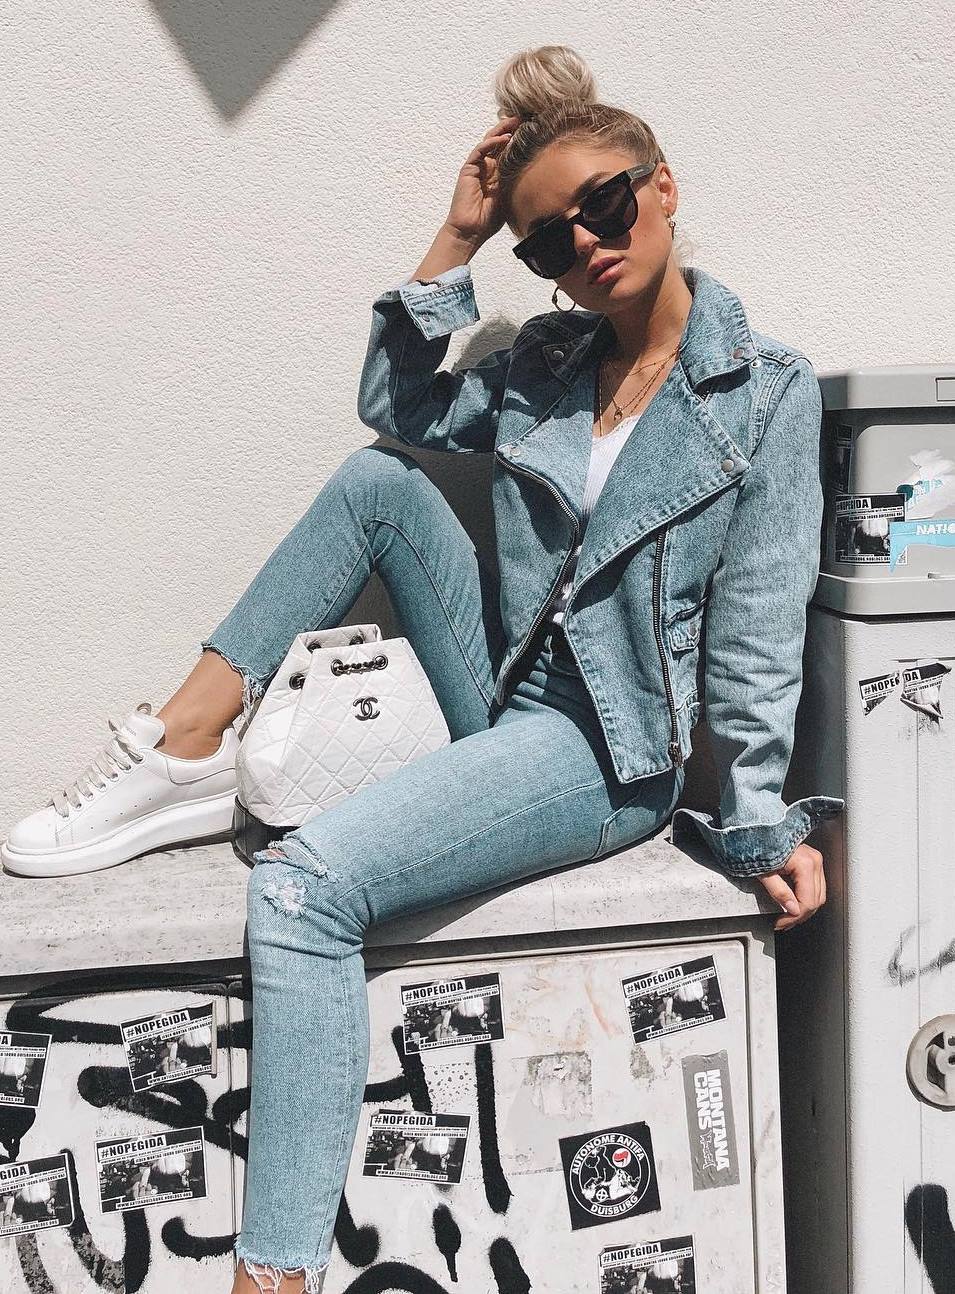 trendy white and denim outfit / jacket + top + jeans + bag + sneakers